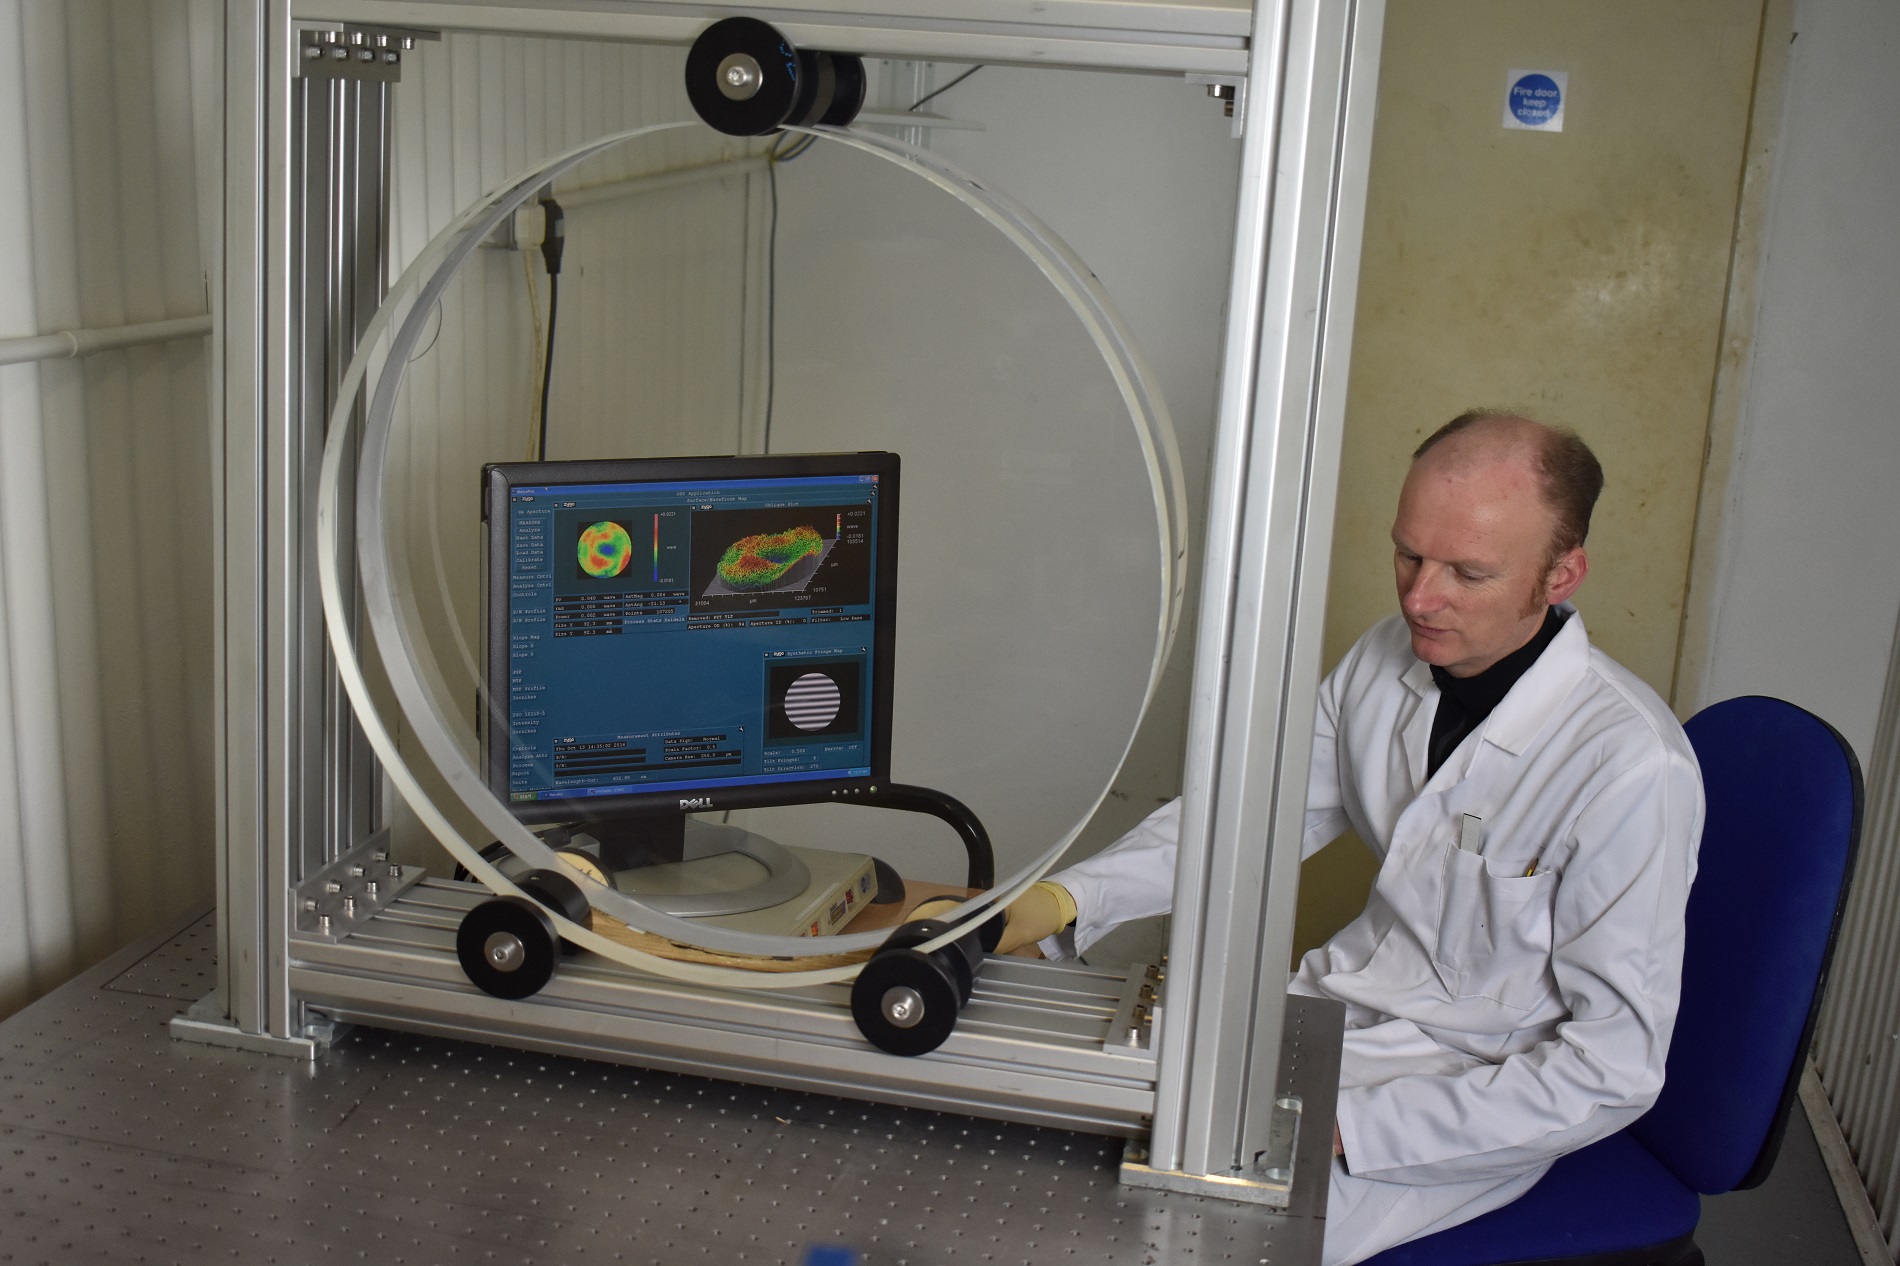 Optical Surfaces Ltd. has developed a 600mm Fizeau interferometer enabling it to now offer quality testing of flats in a single aperture up to 600mm in diameter.